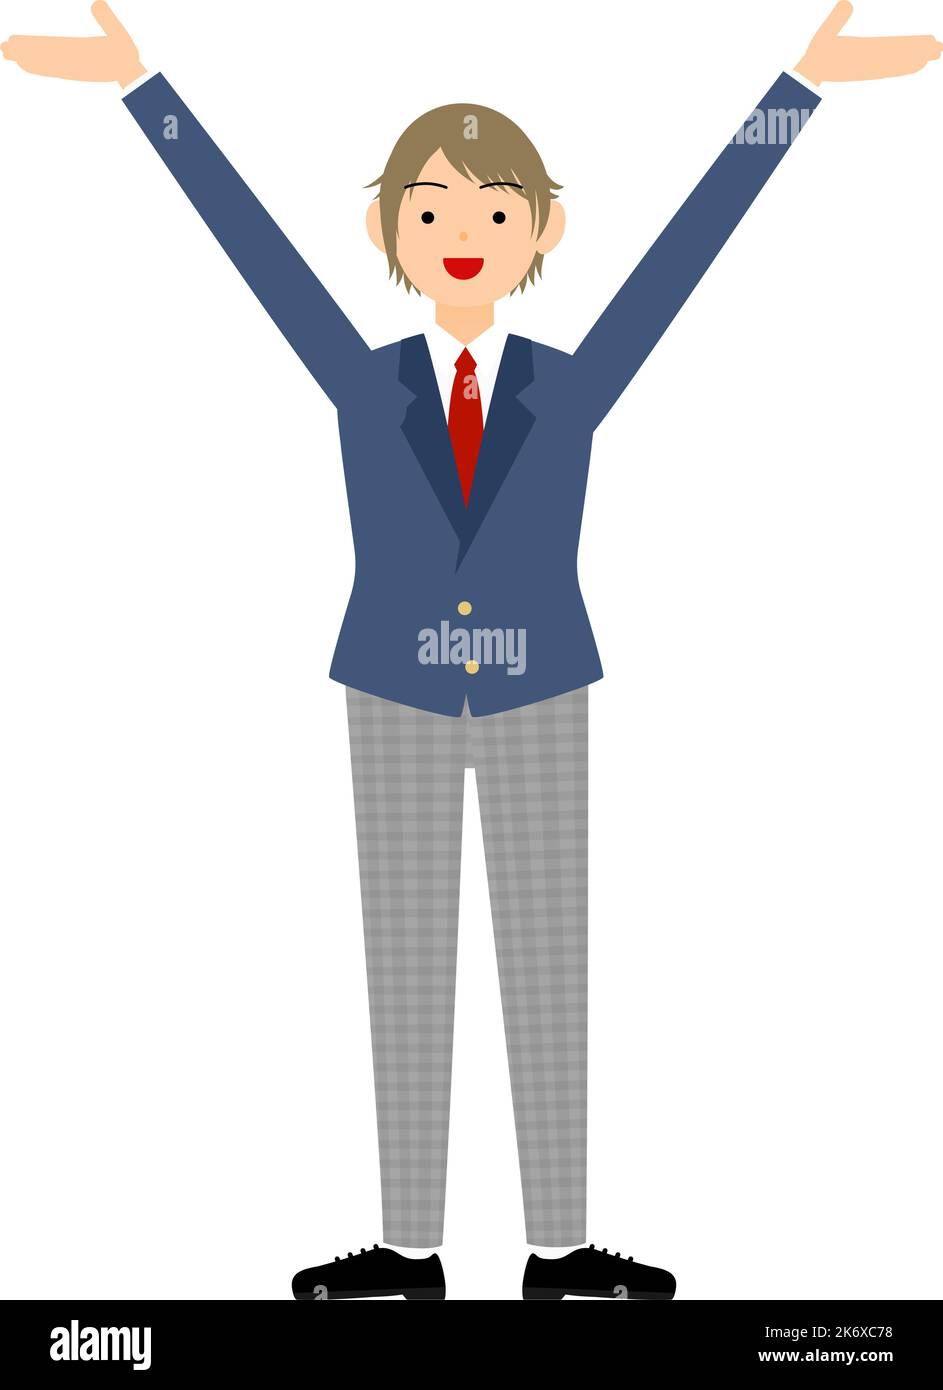 Genderless, blazer uniform, Hailing gesture with outstretched arms Stock Vector